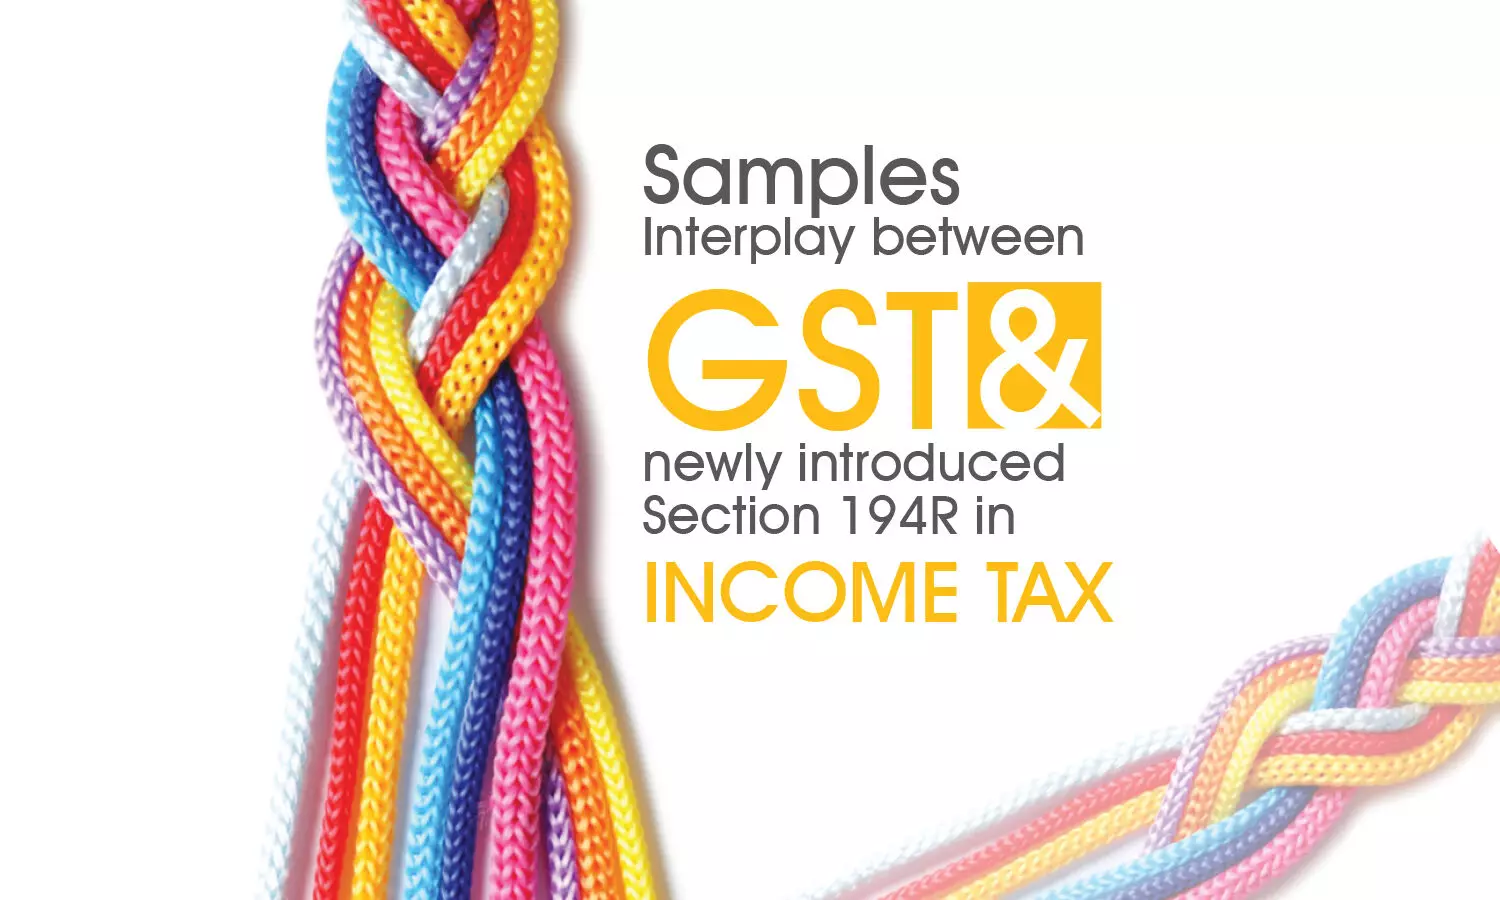 Samples – Interplay between GST & newly introduced Section 194R in Income Tax